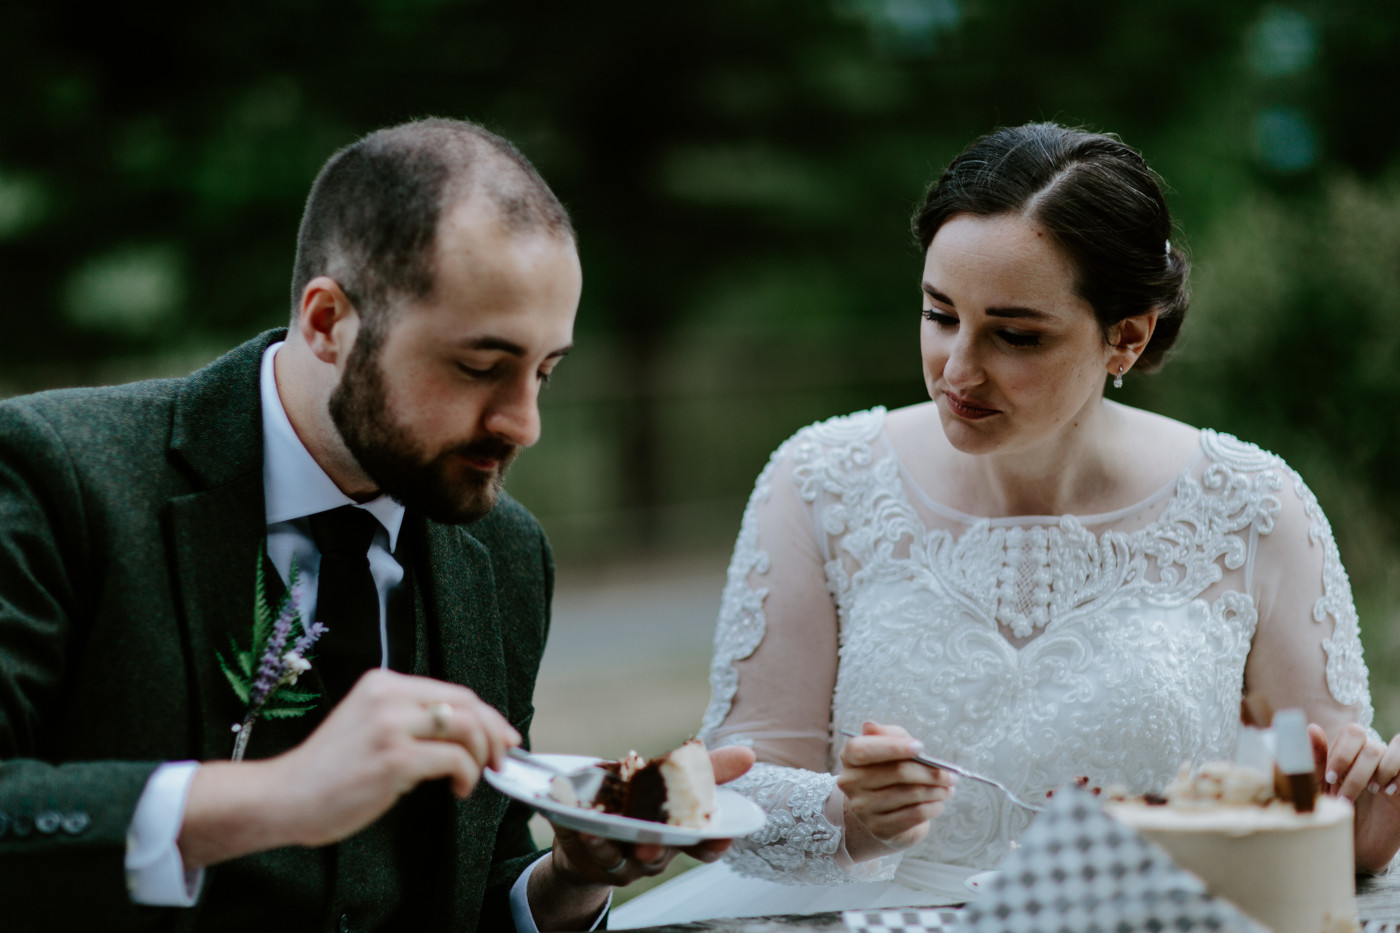 Elizabeth and Alex feed each other cake. Elopement photography at North Cascades National Park by Sienna Plus Josh.